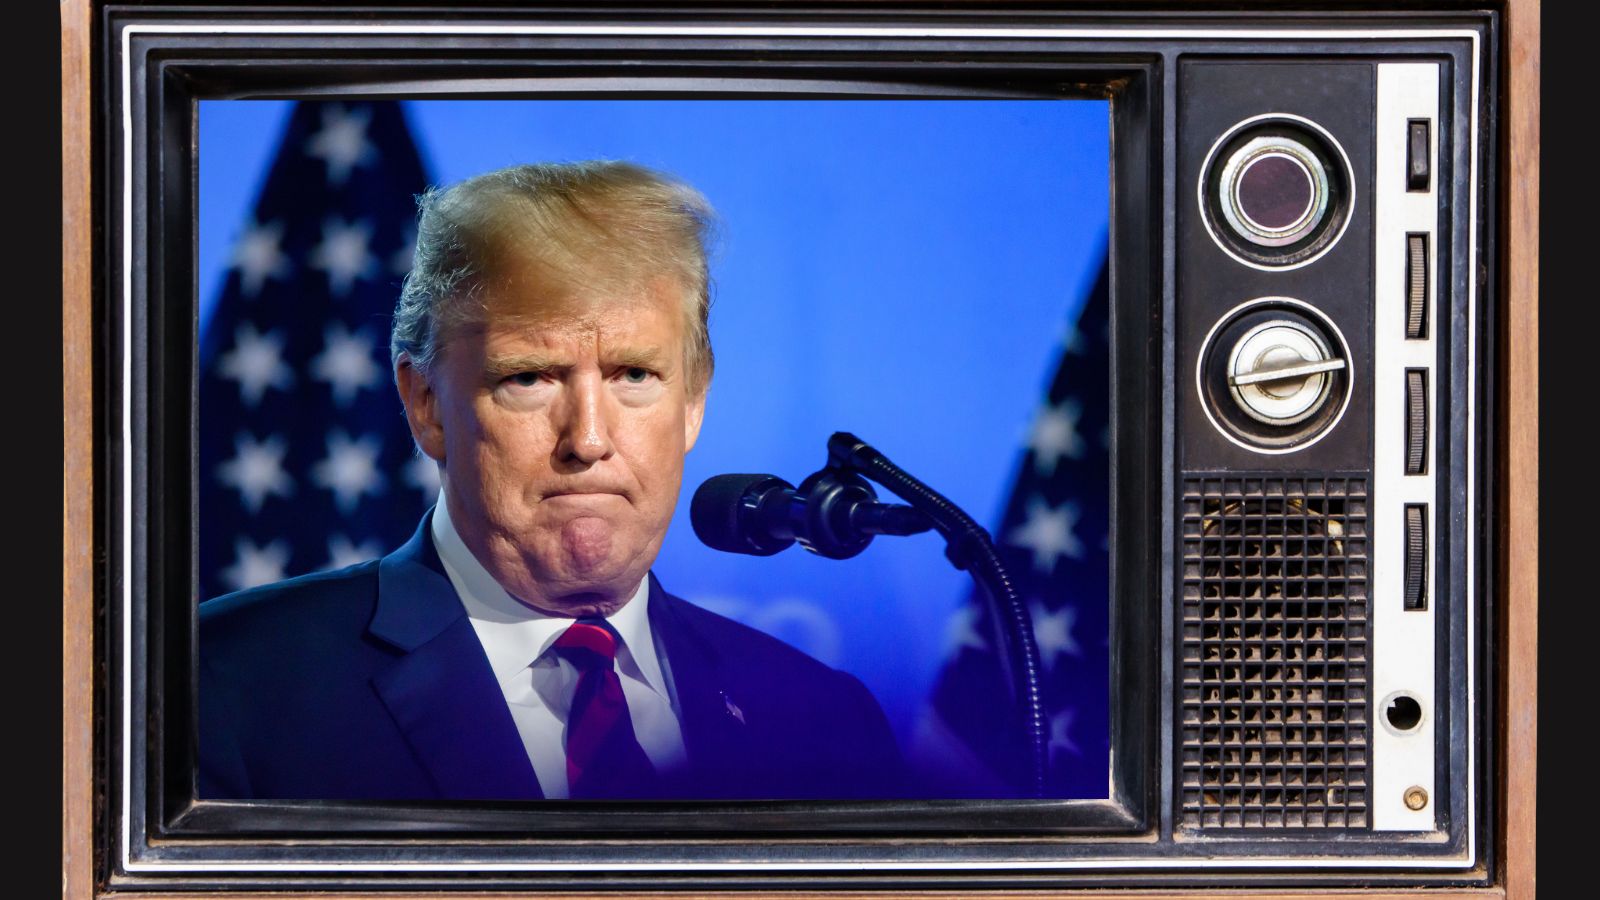 “He’s a Whining Monster Who Tried to End Our Democracy”: Trump Challenged Over Unconvincing Request to Televise Trial